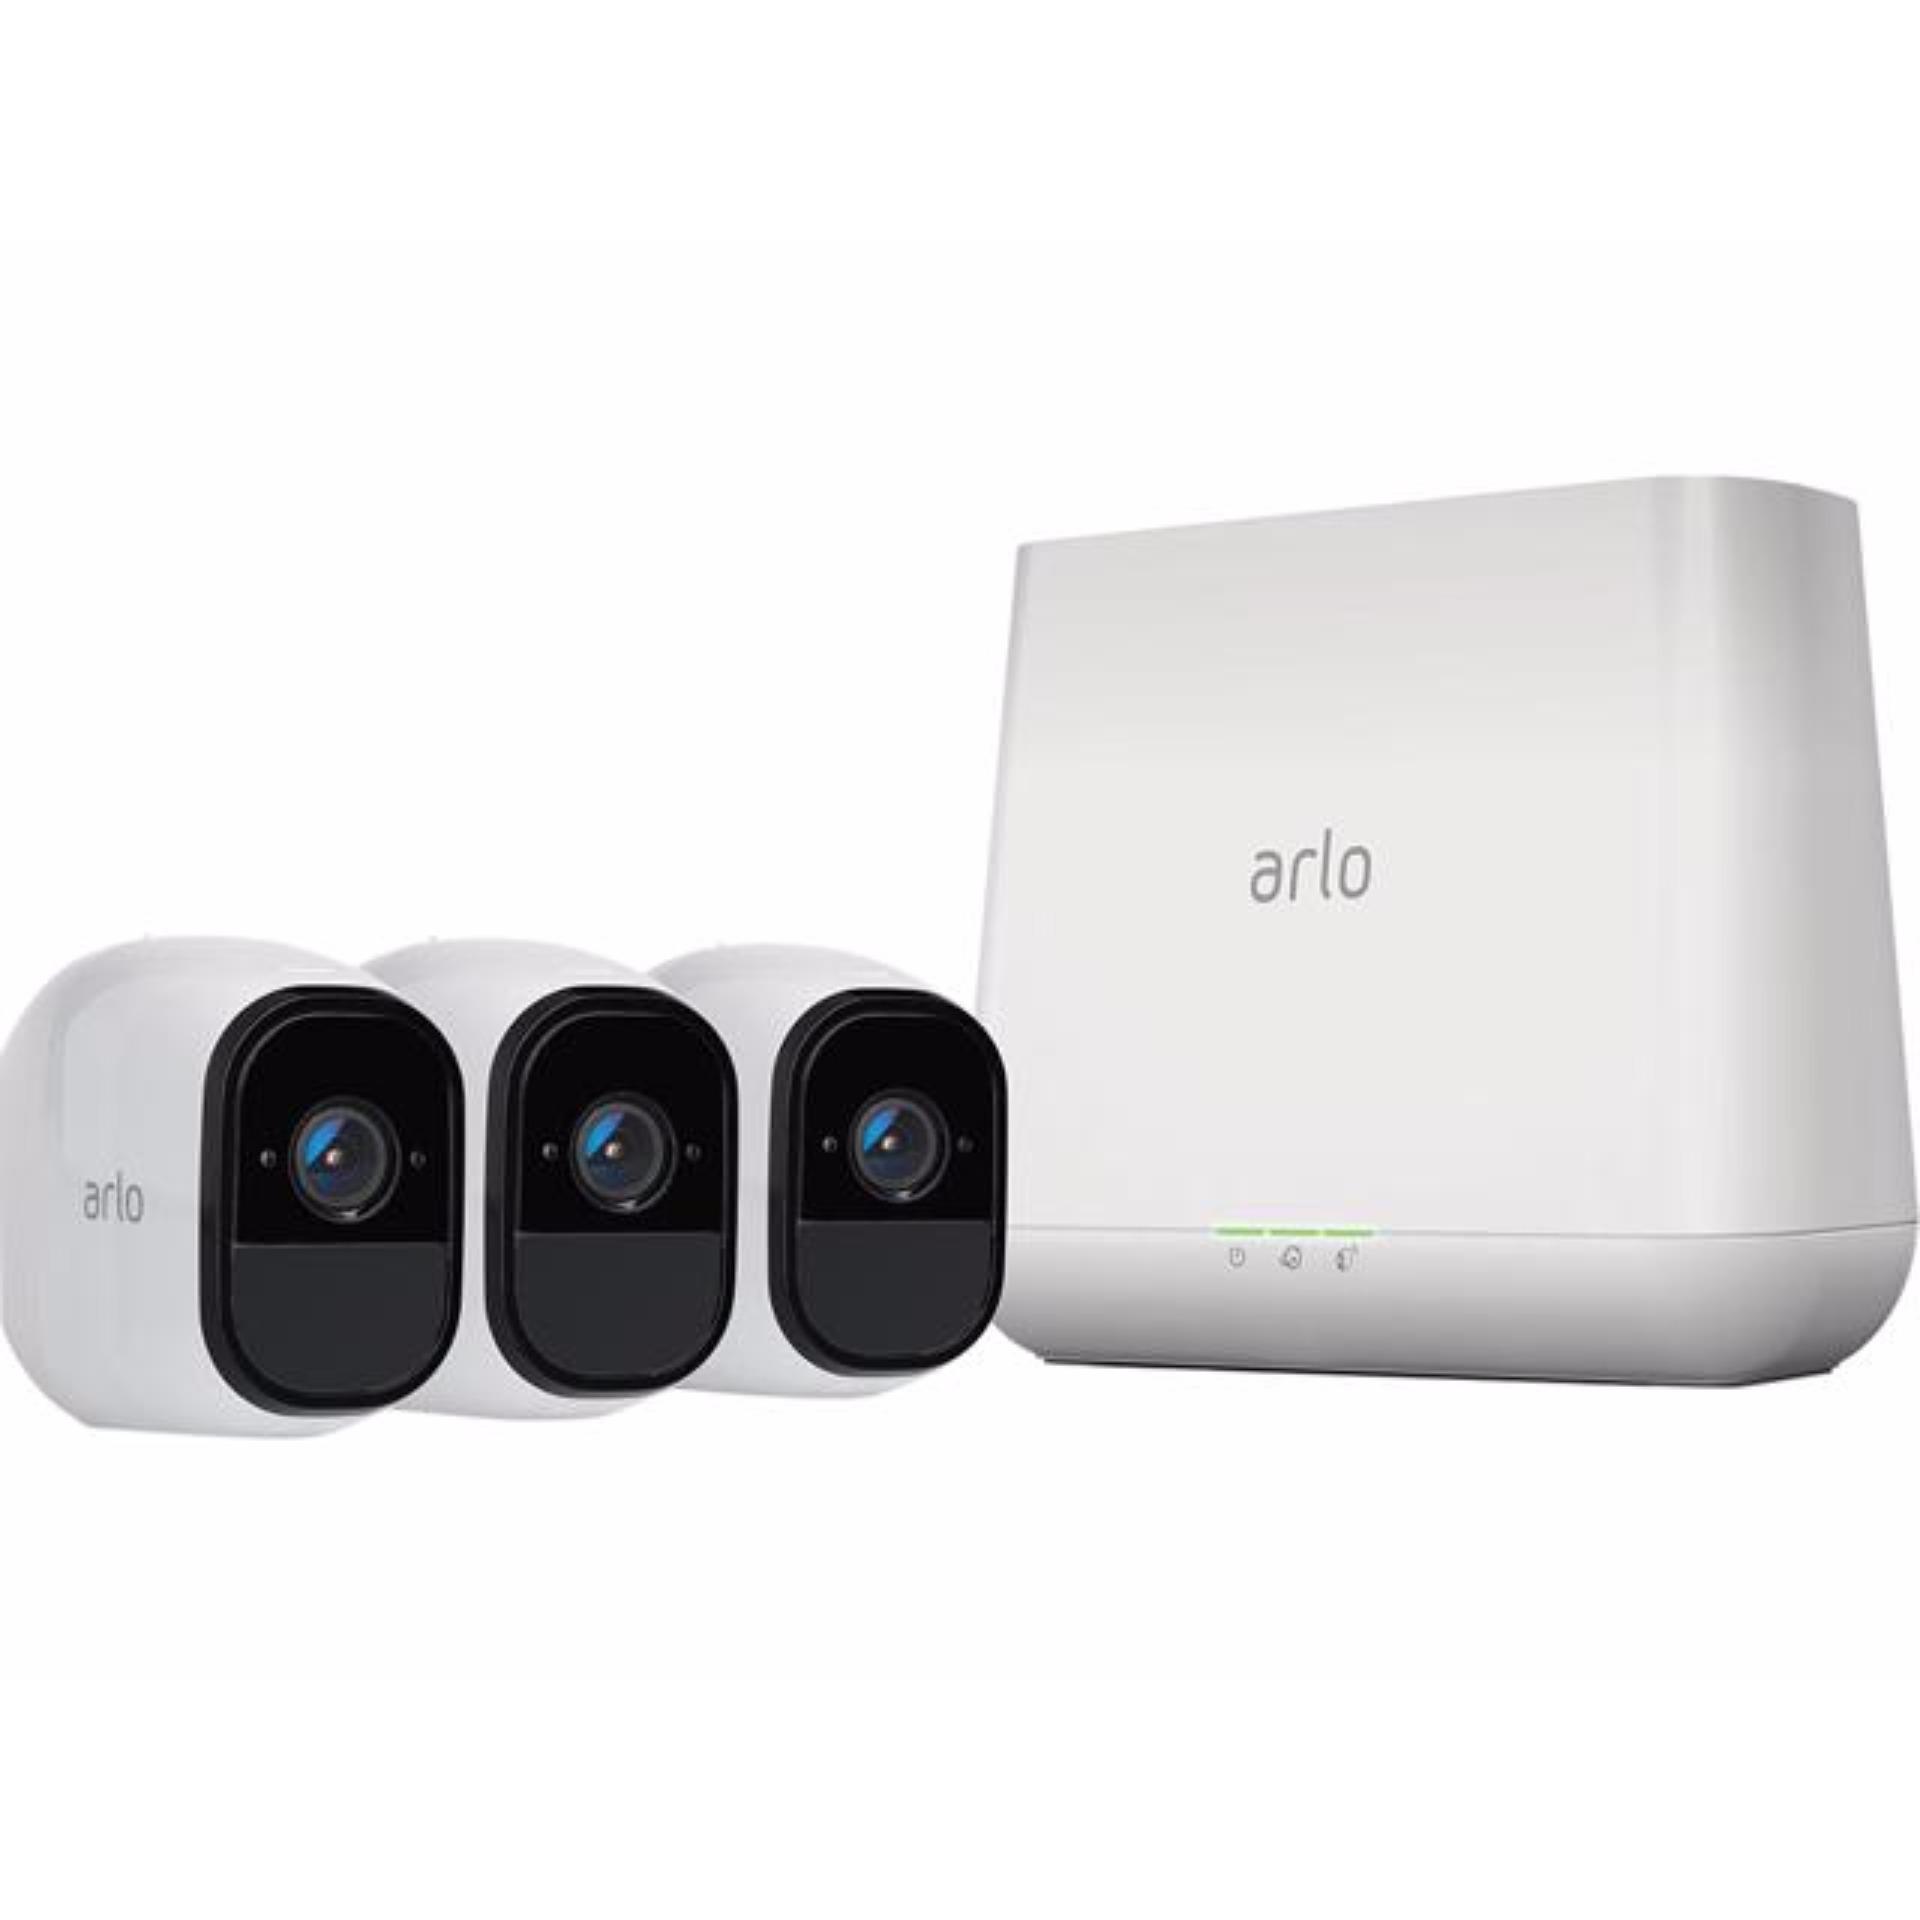 NETGEAR VMS4330 Arlo Pro Security System 3 Rechargeable Wire-Free HD Night Vision Indoor / Outdoor Security Camera with Audio and...